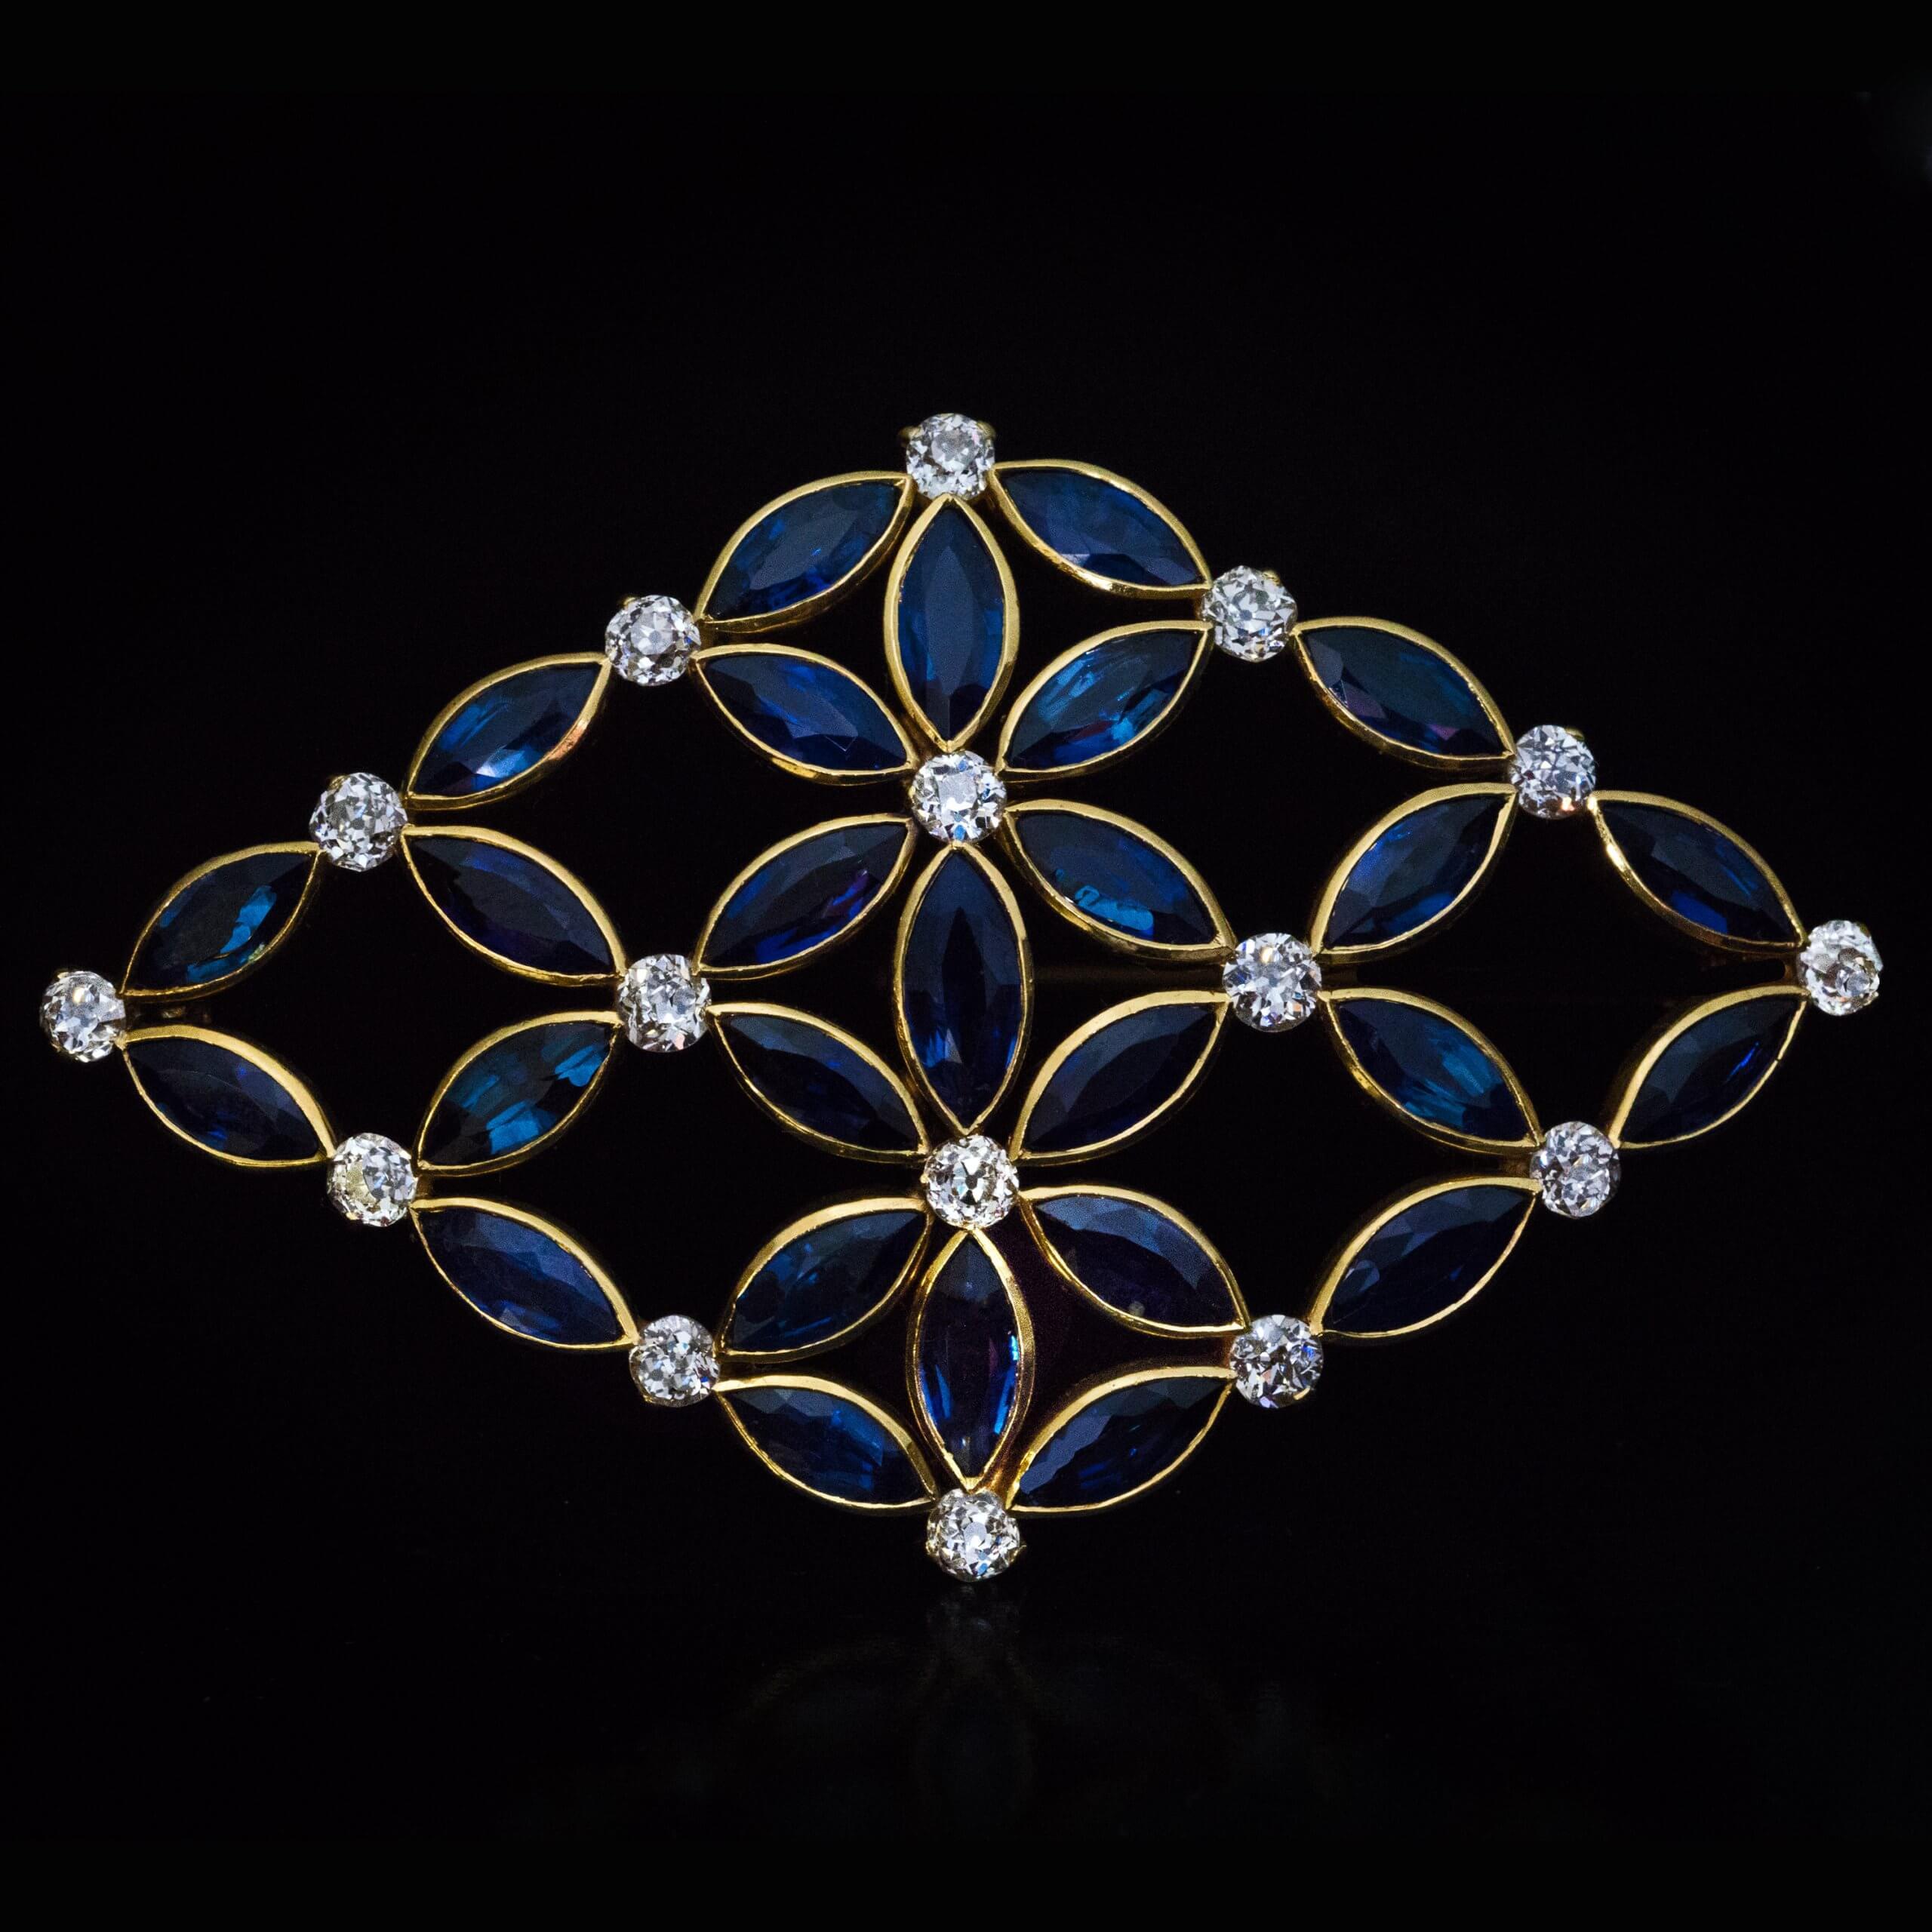 Marquise Cut Large Antique Sapphire Diamond Gold Brooch For Sale